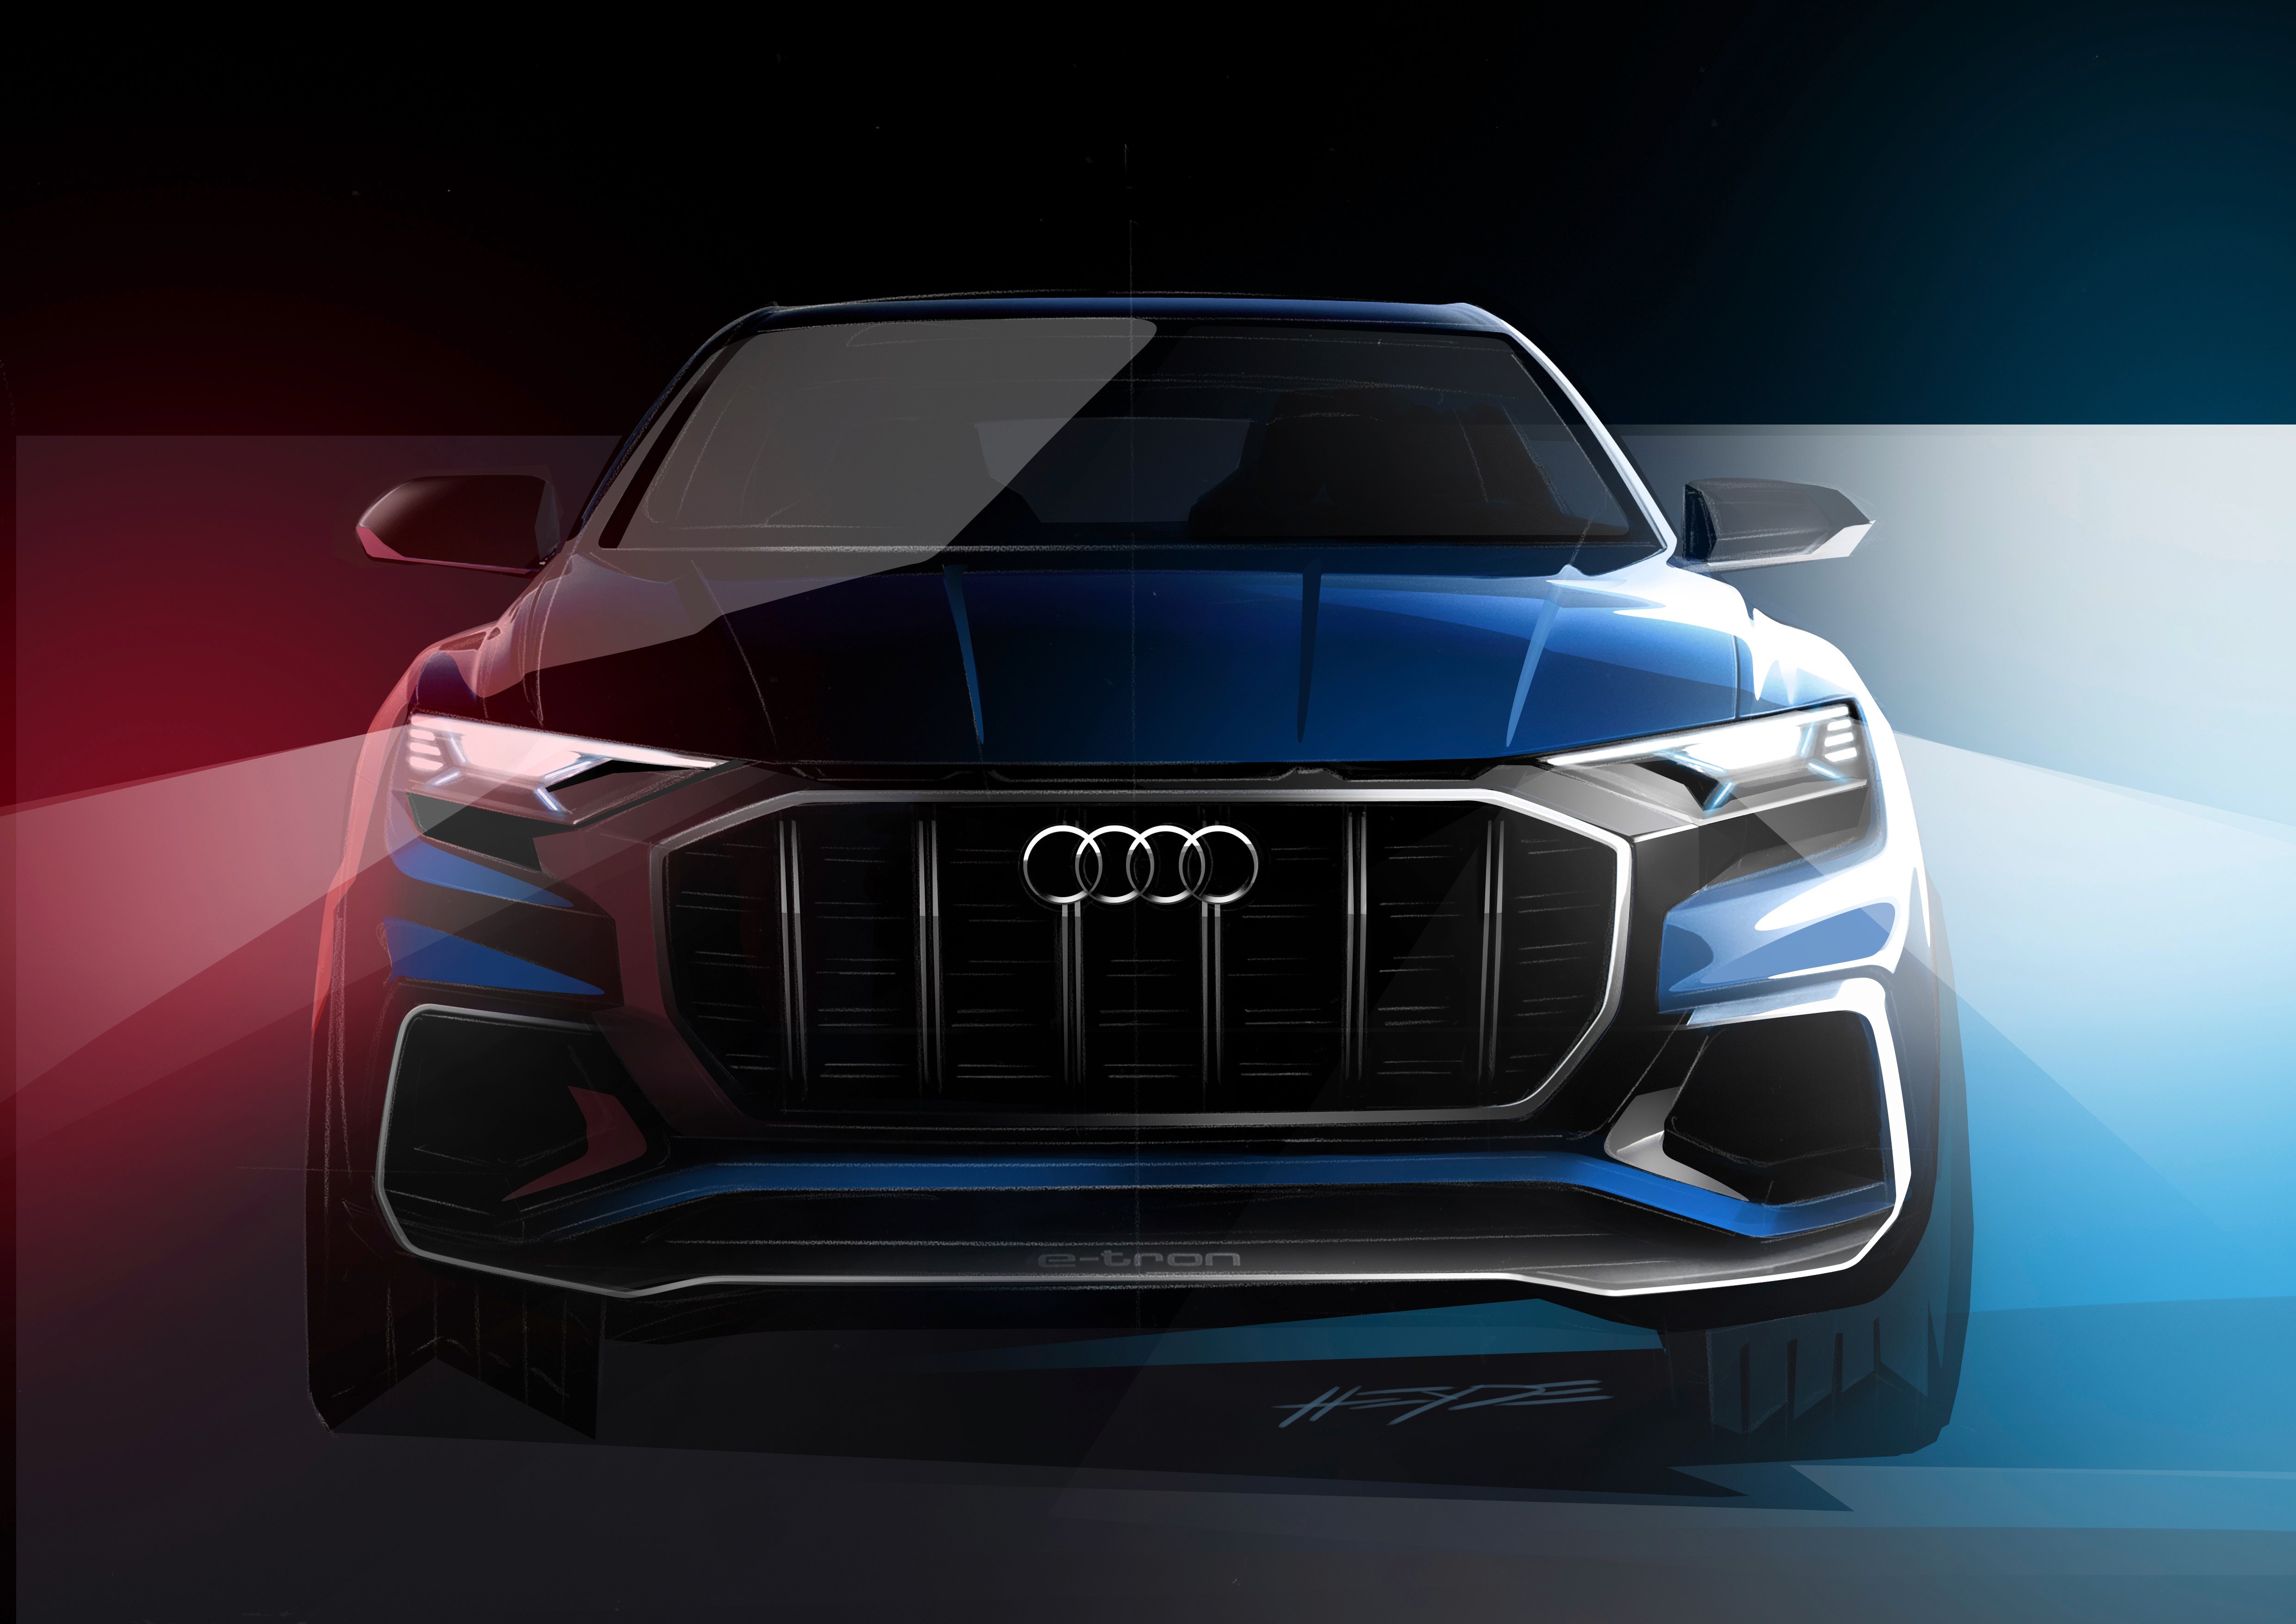 Audi Q8 concept, Uber self-driving tests end, Hyundai Motor America CEO fired